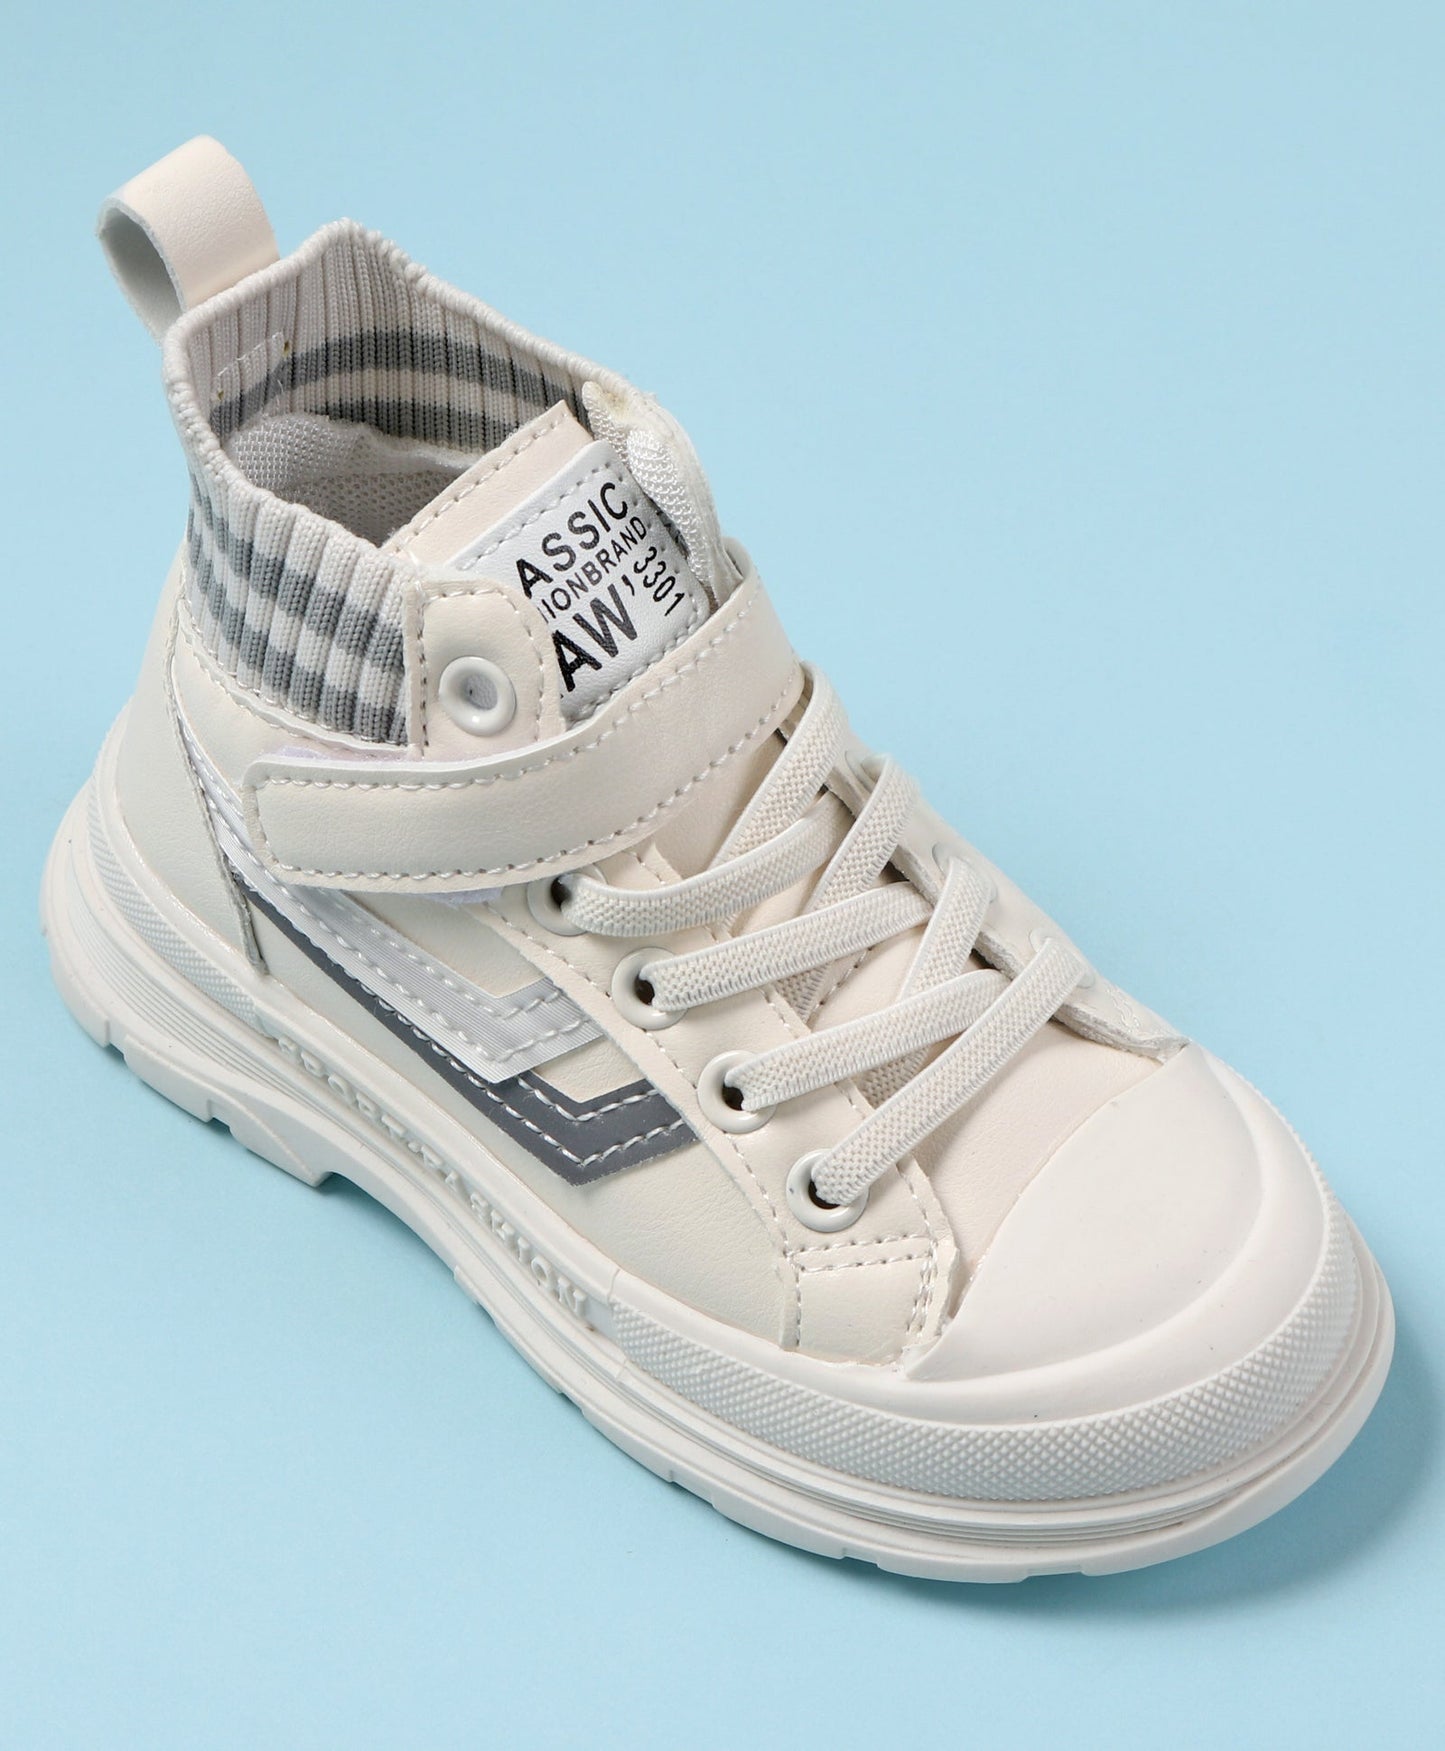 SIDE PATCH LACE DESIGN HIGH TOP SNEAKERS - WHITE